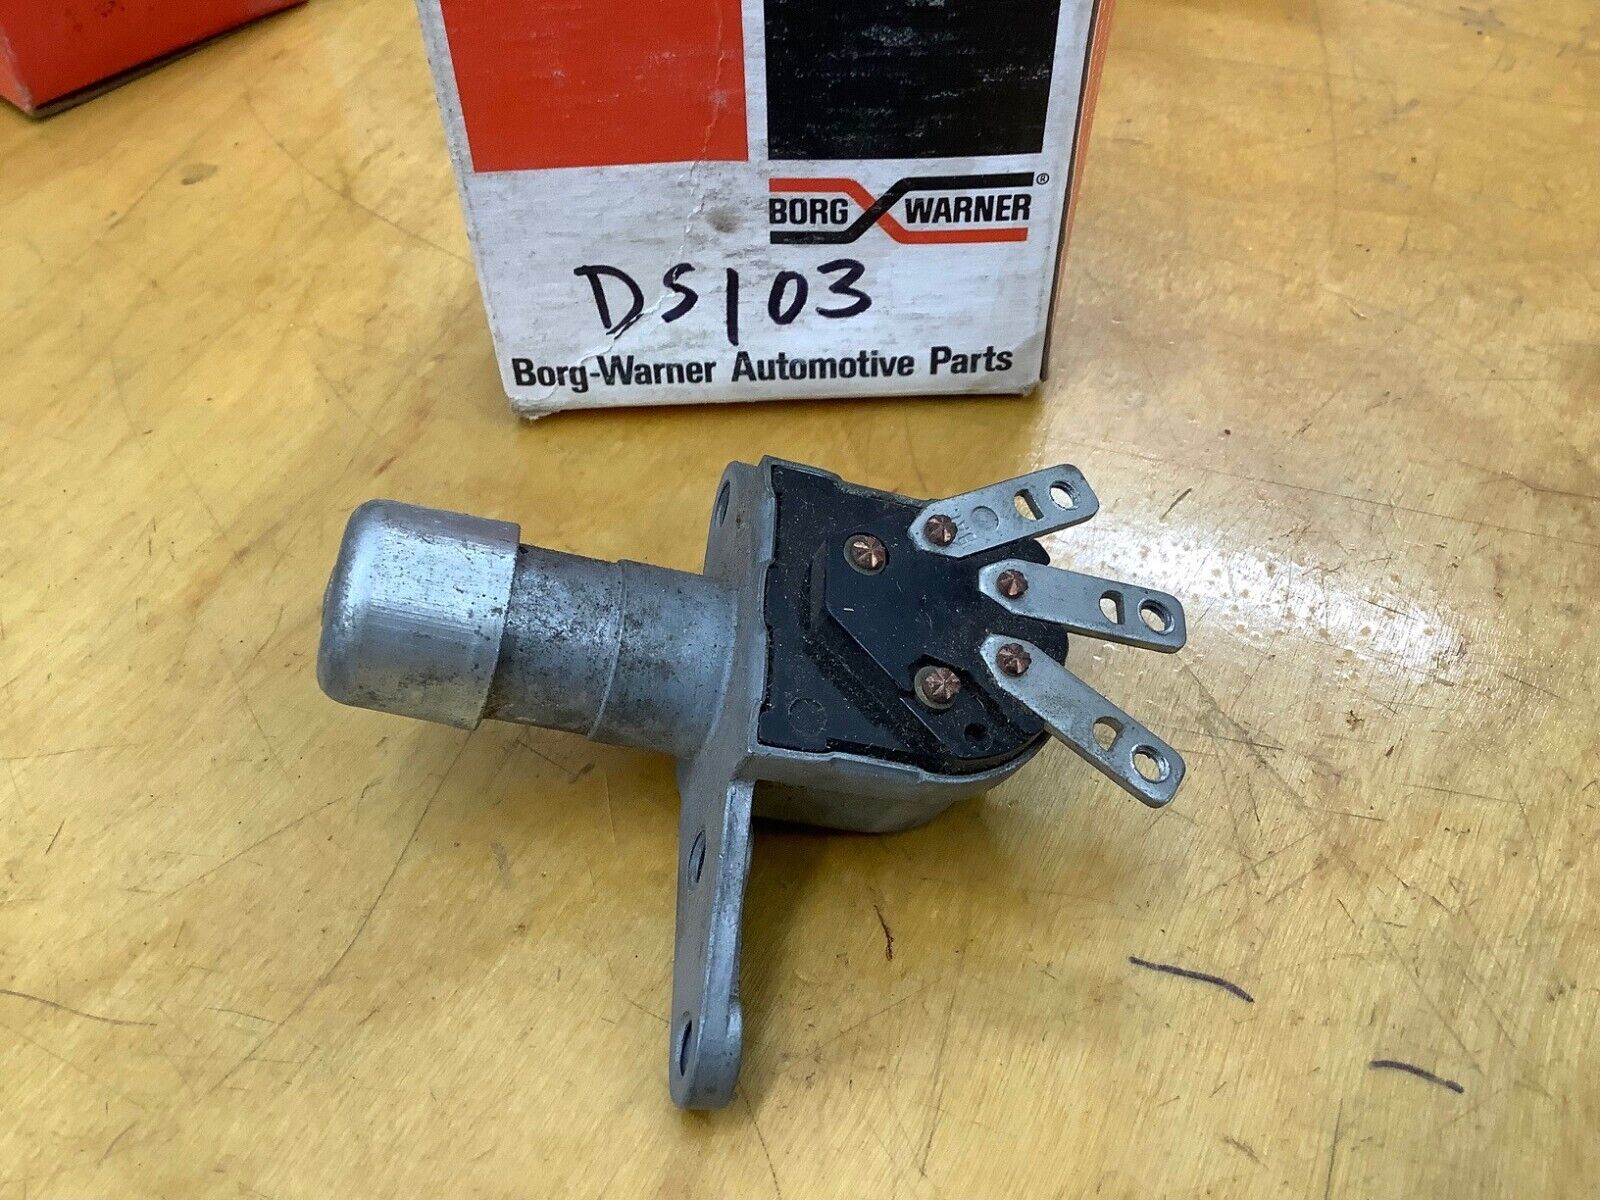 1975-80 INTERNATIONAL VINTAGE BORG WARNER# DS103 DIMMER SWITCH IN NORS CONDITION